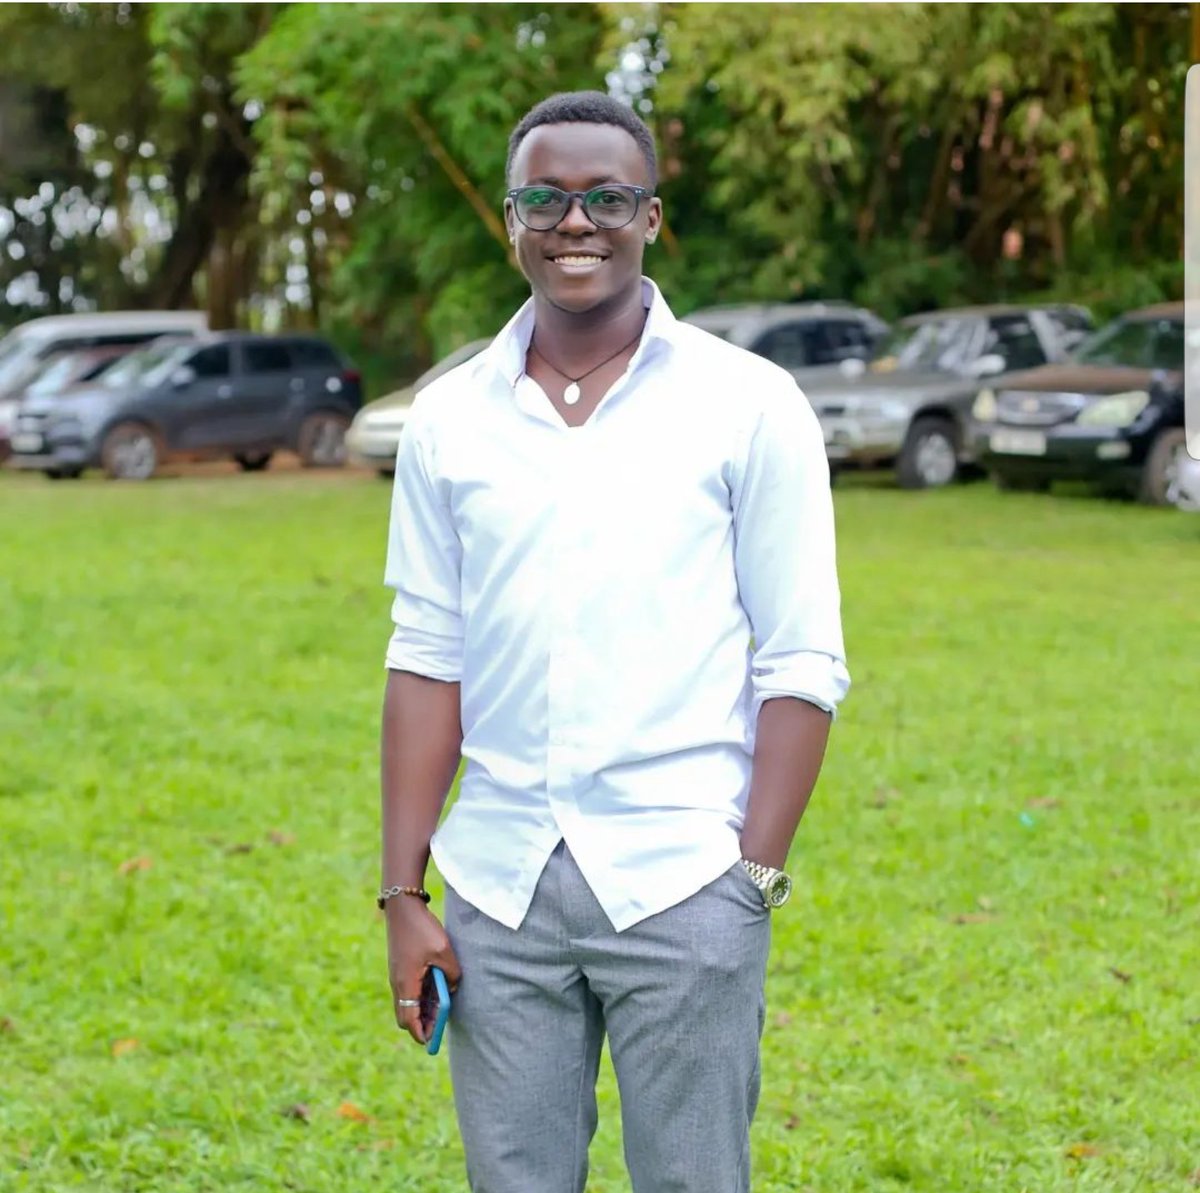 Buffalo MCM;Joel Latim Katumwa a biomedical engineer working with Advanced Prosthetics and Orthotics-Kenya. A sports enthusiast,tennis player and proud supporter of Maroons FC in the Uganda premier league. Loves travel and serving the community.